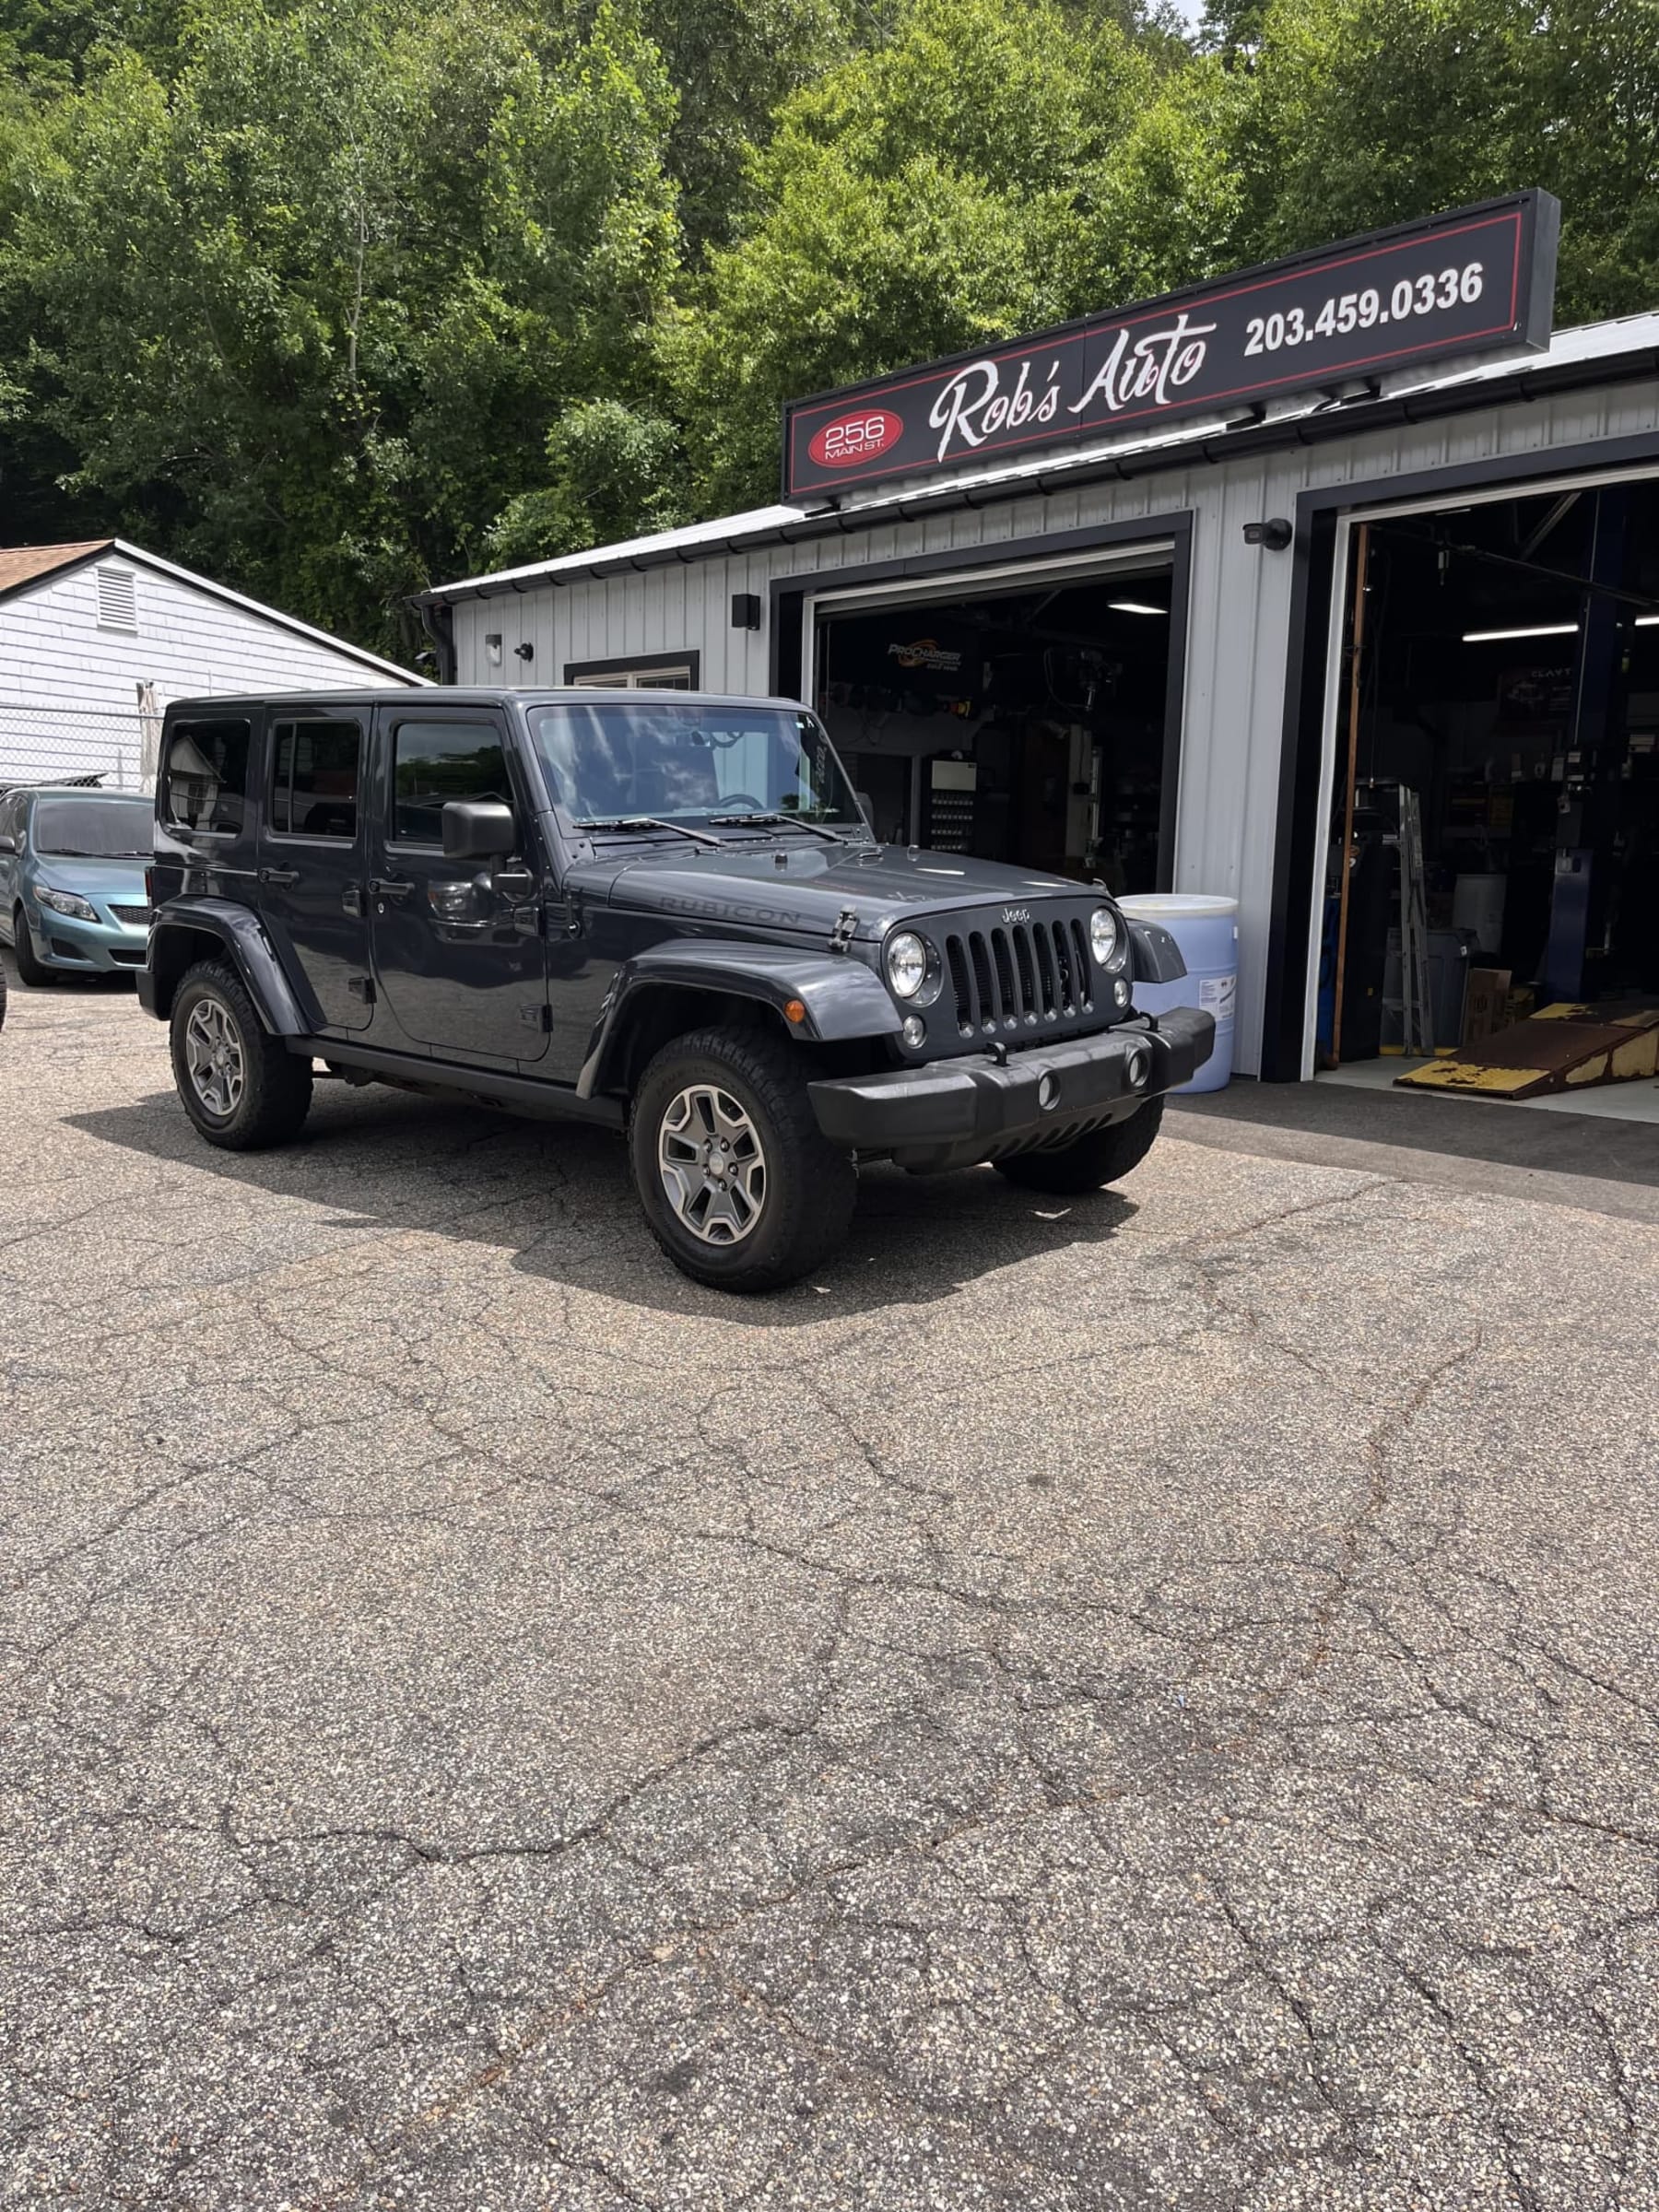 NEW ARRIVAL!! 2016 Jeep Unlimited Rubicon!! Clean Carfax!! ONLY 29,500 miles!! Loaded with body colored matching hardtop, leather heated seats, soft top, Navigation, Bluetooth and much more!! With ONLY 29,500 miles definitely won’t last at $28,900!!